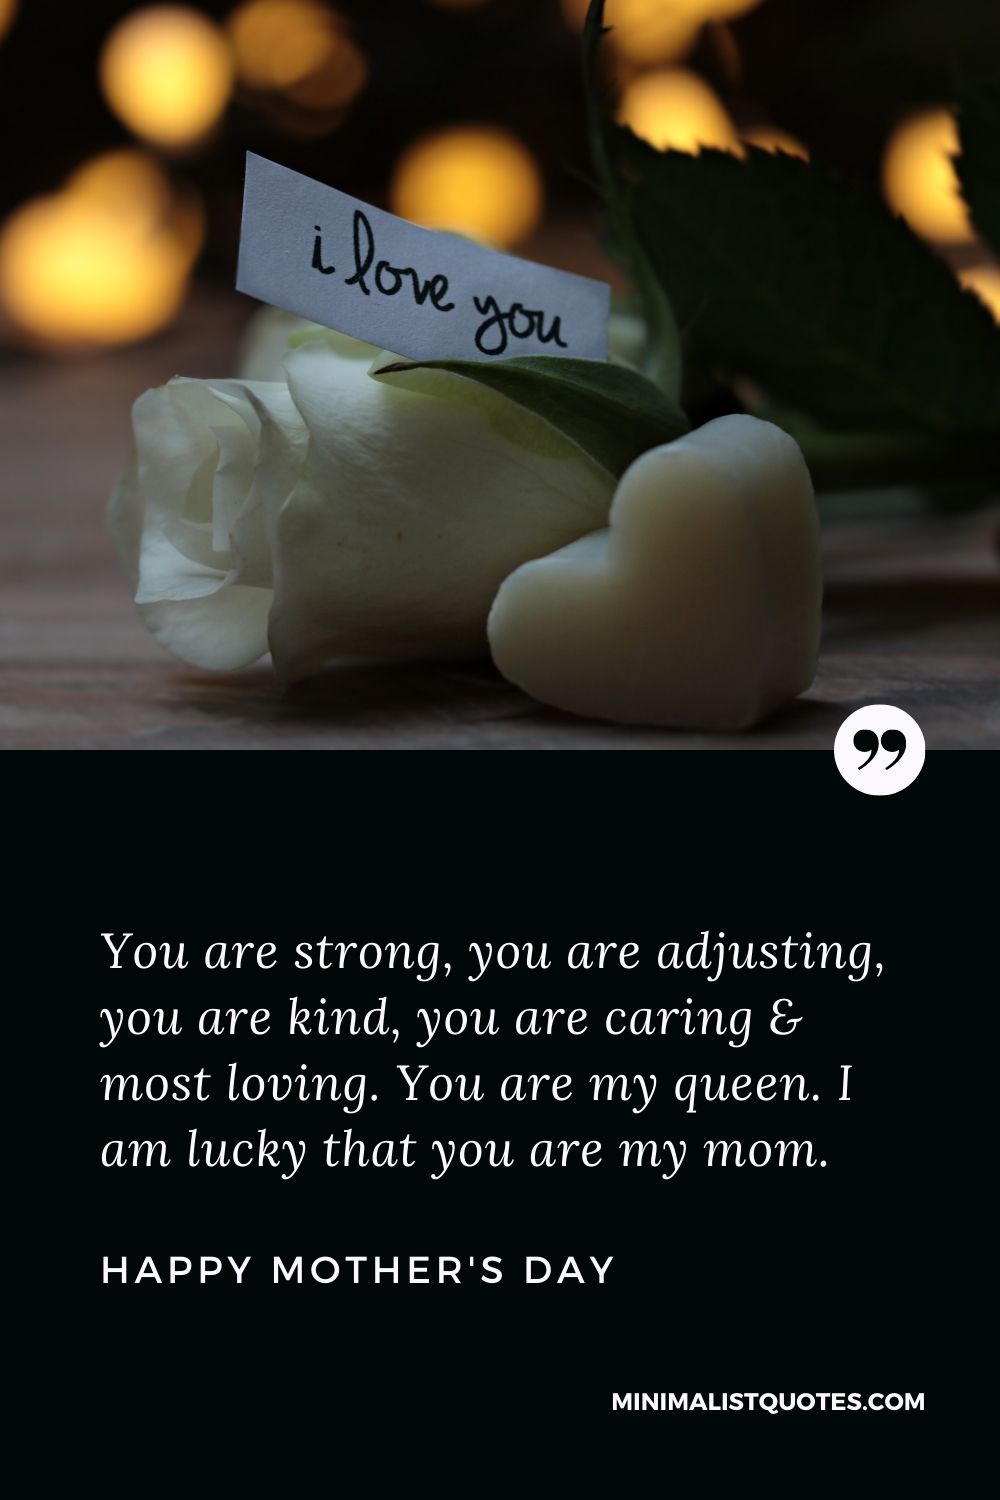 Mother's day wish, message & quote with HD image: You are strong, you are adjusting, you are kind, you are caring & most loving. You are my queen. I am lucky that you are my mom. Happy Mother's Day!